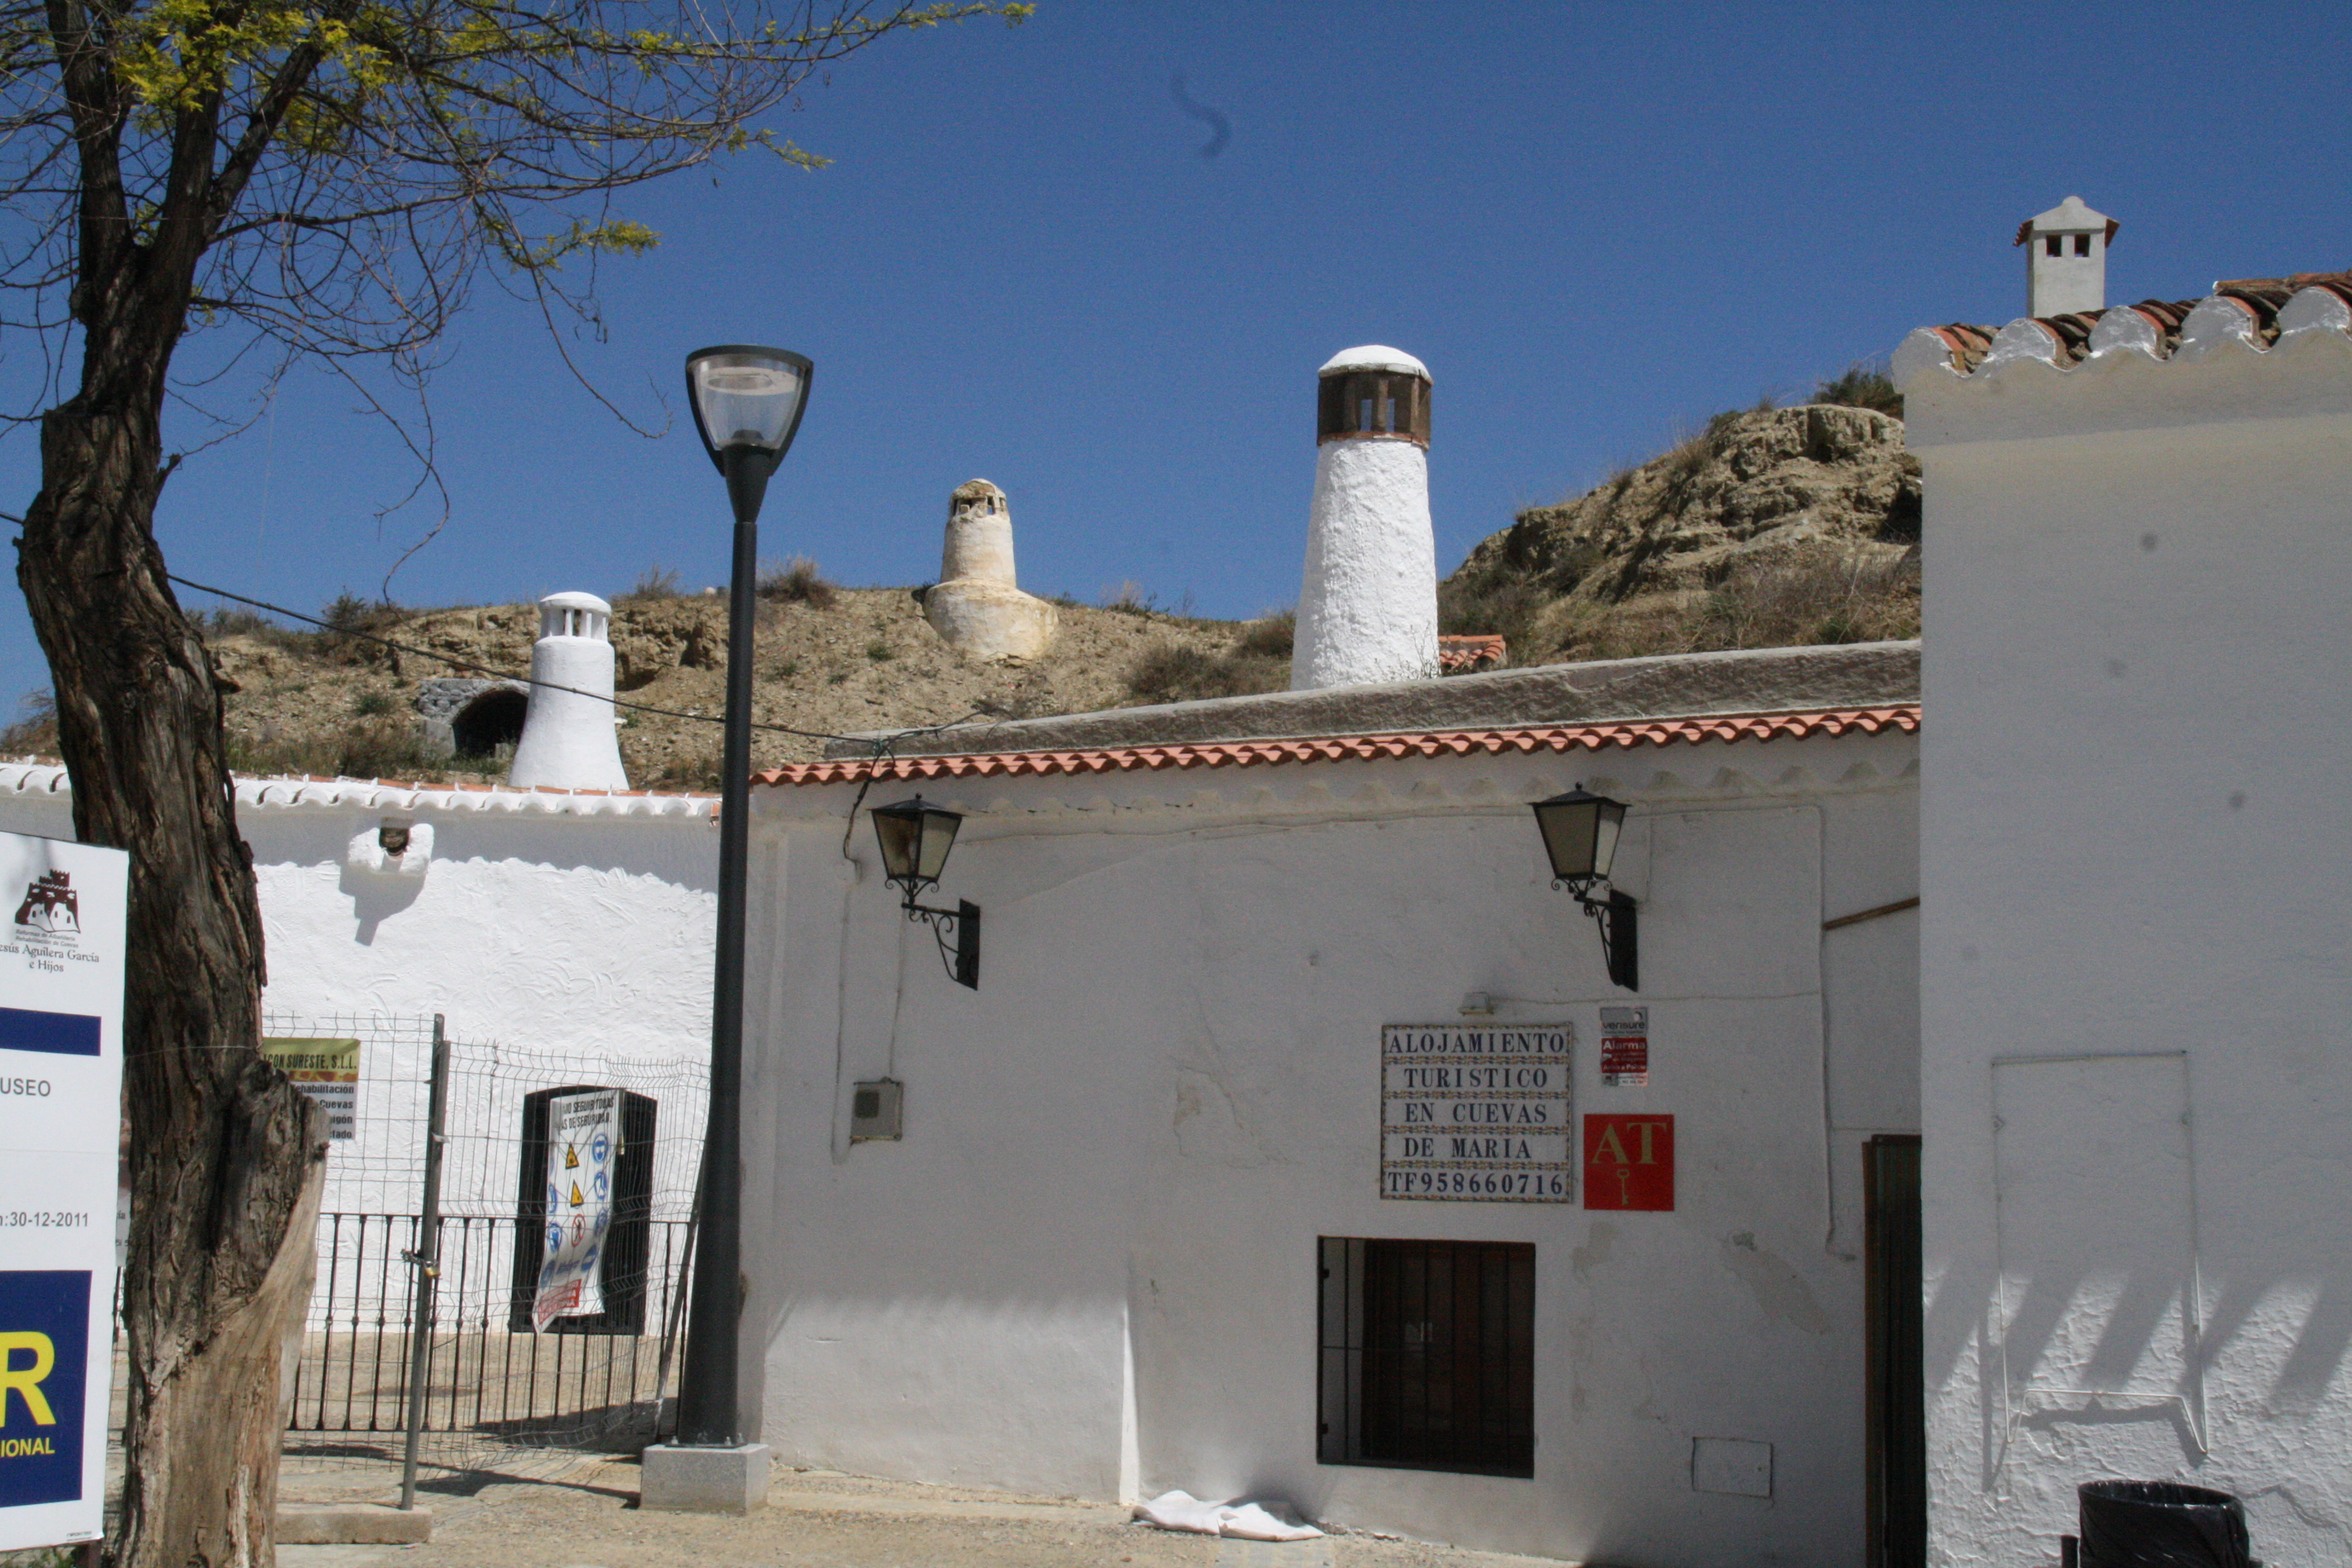 Outside a cave dwelling in Guadix